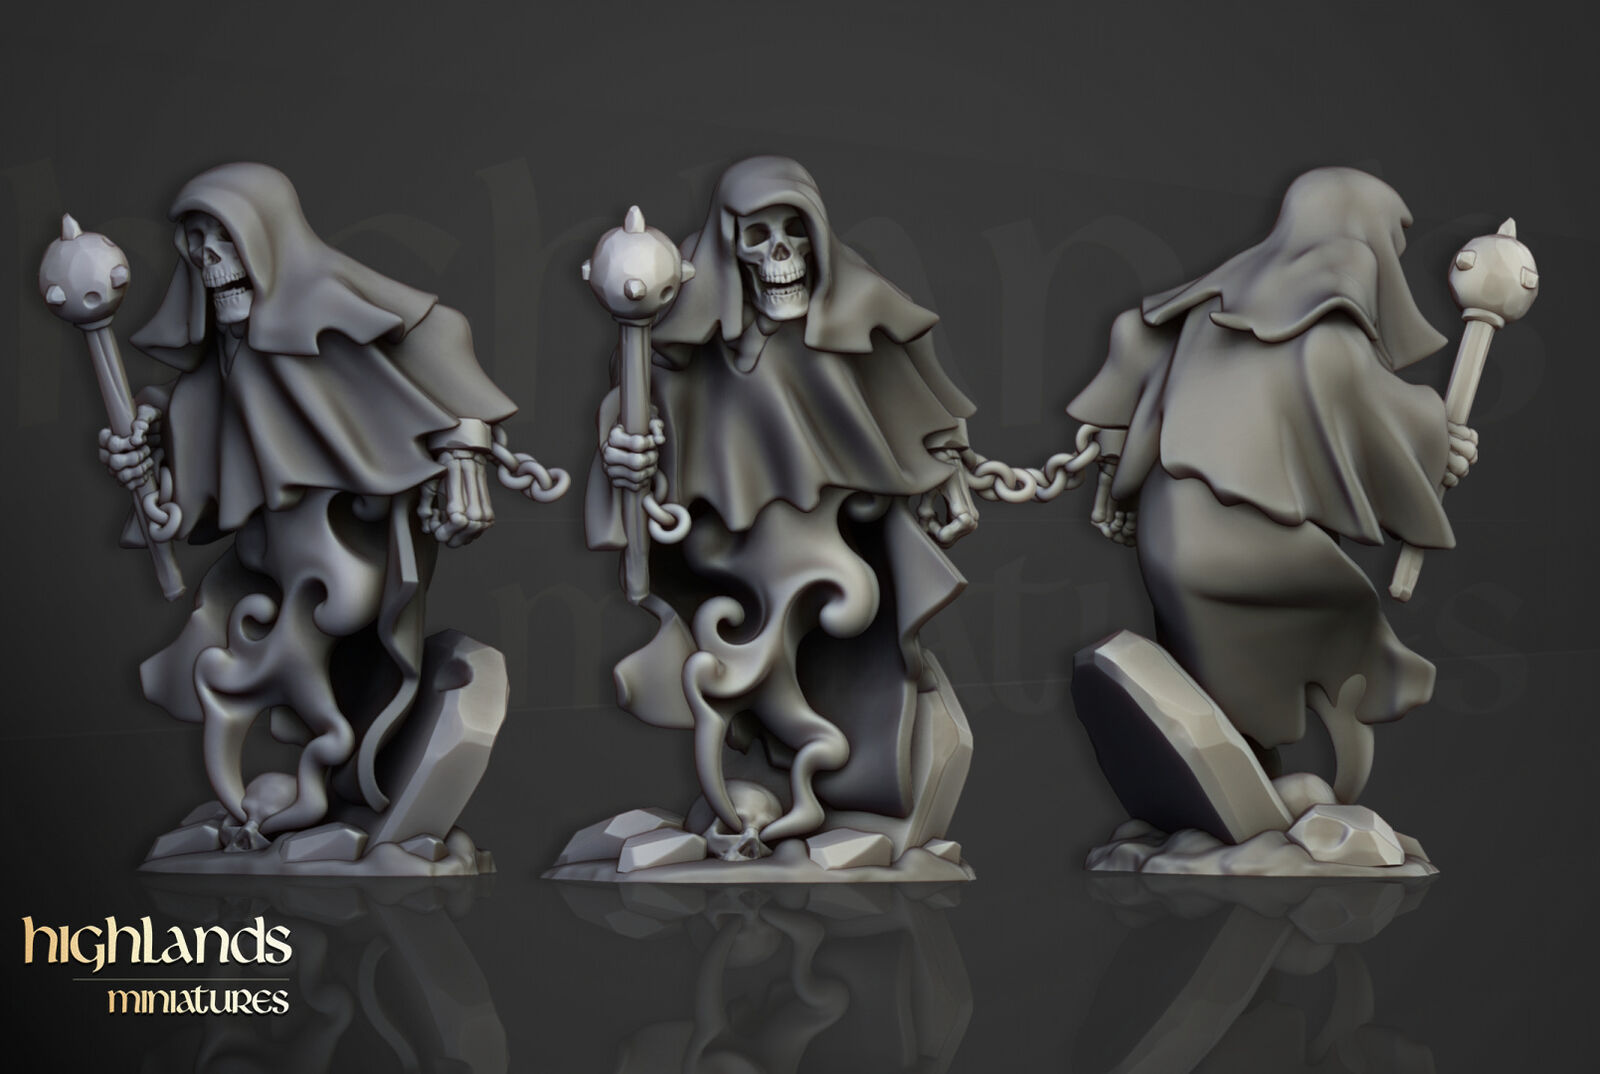 Undead Miniatures designed by Highlands miniatures for Tabletop Wargaming